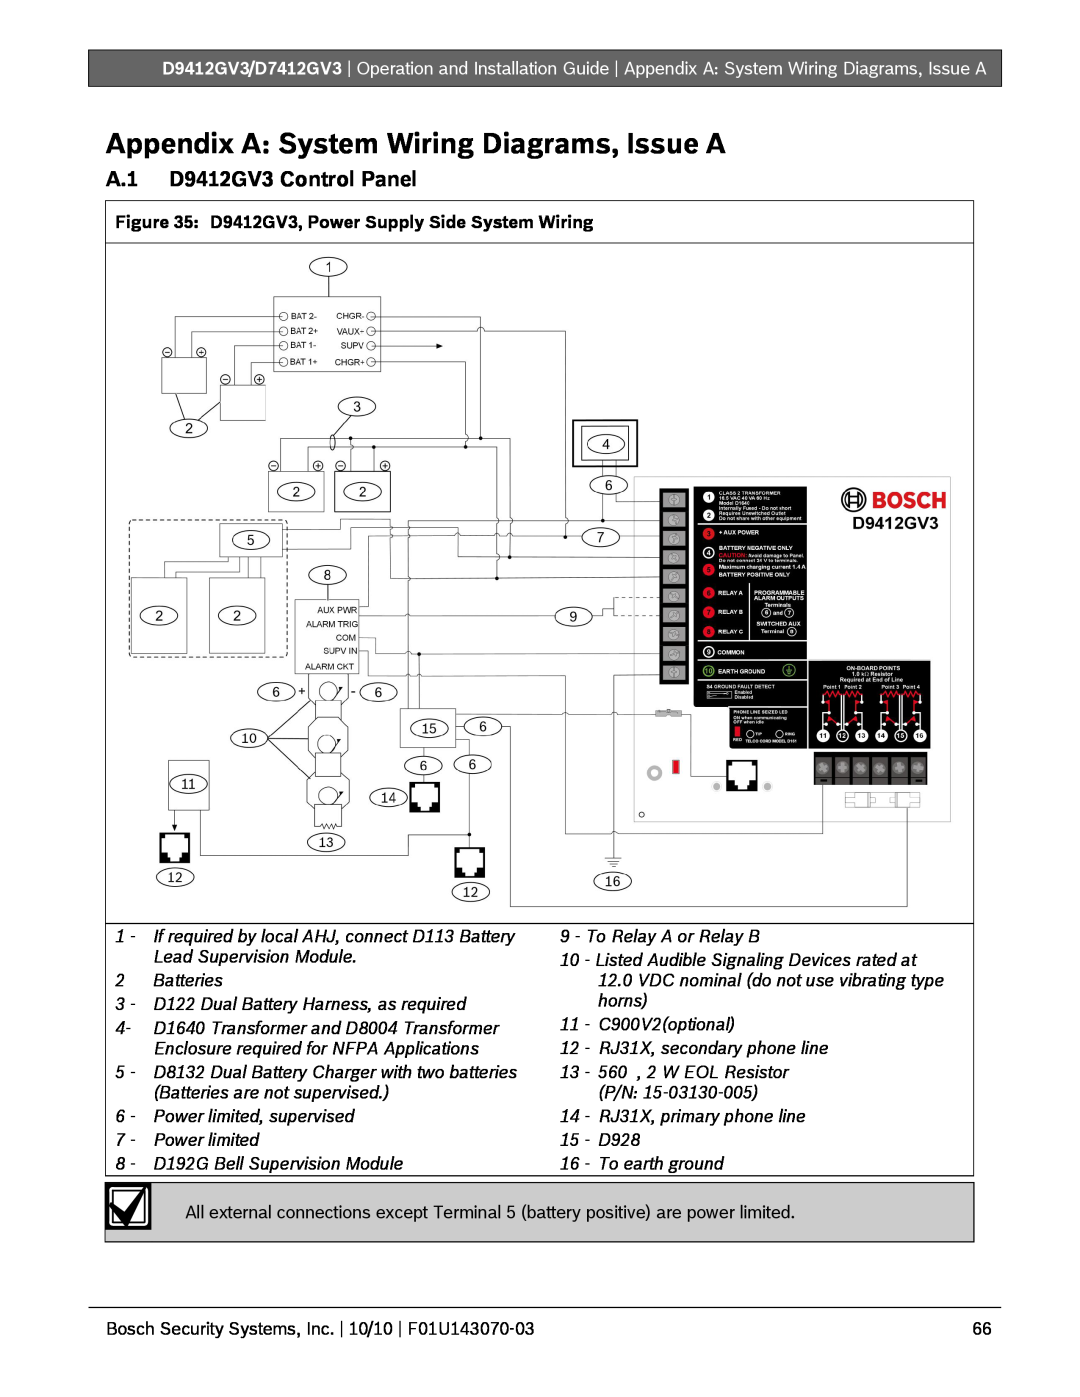 Bosch Appliances D7412GV3 manual Appendix A: System Wiring Diagrams, Issue A, A.1 D9412GV3 Control Panel 